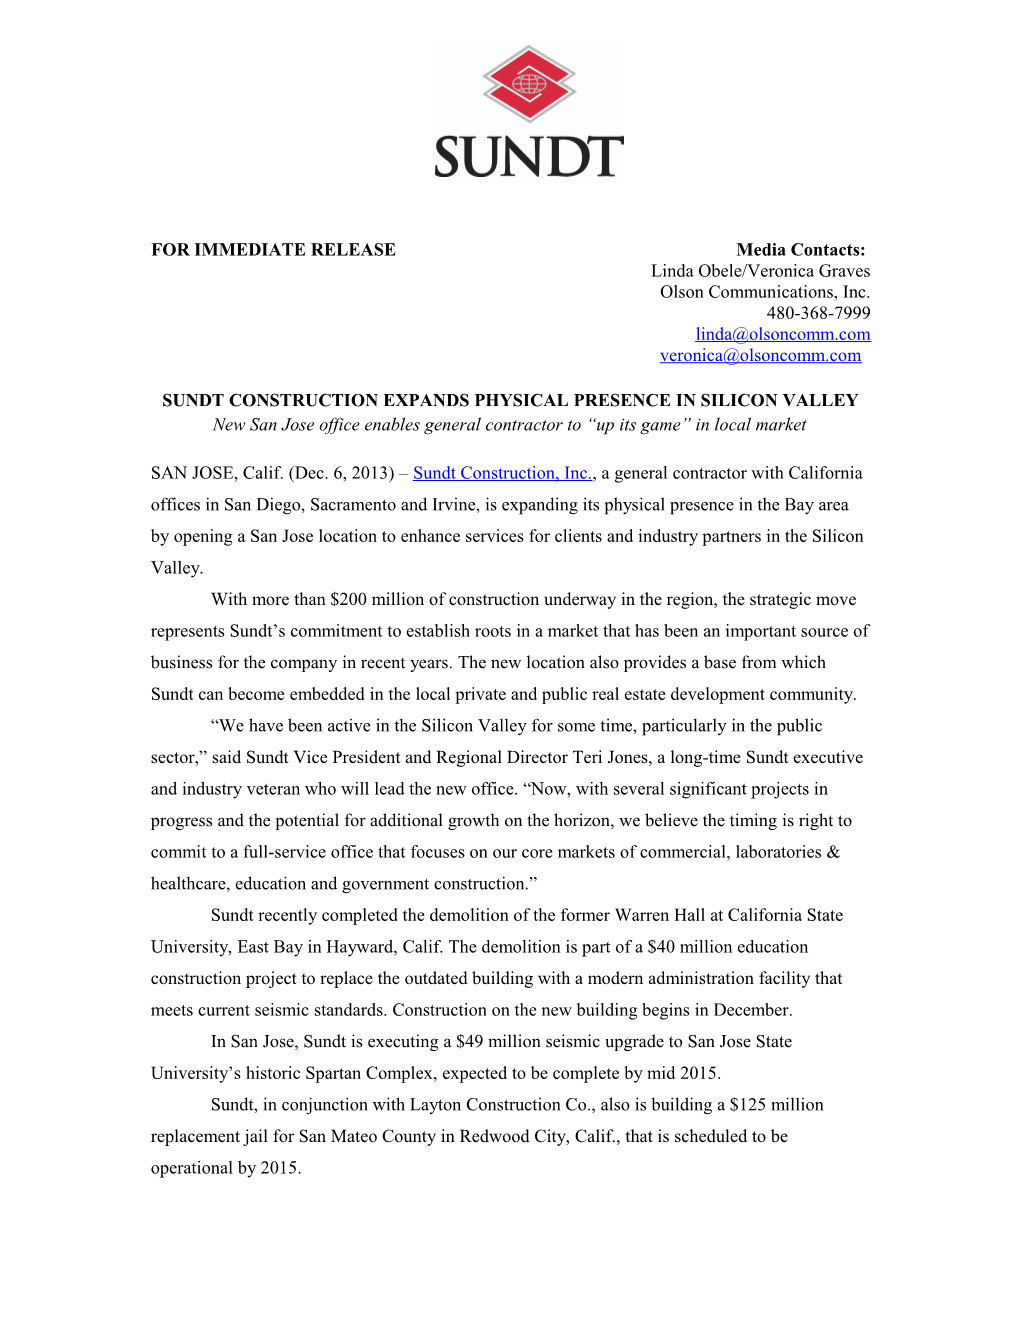 Sundt Construction Expands Physical Presence in Silicon Valley